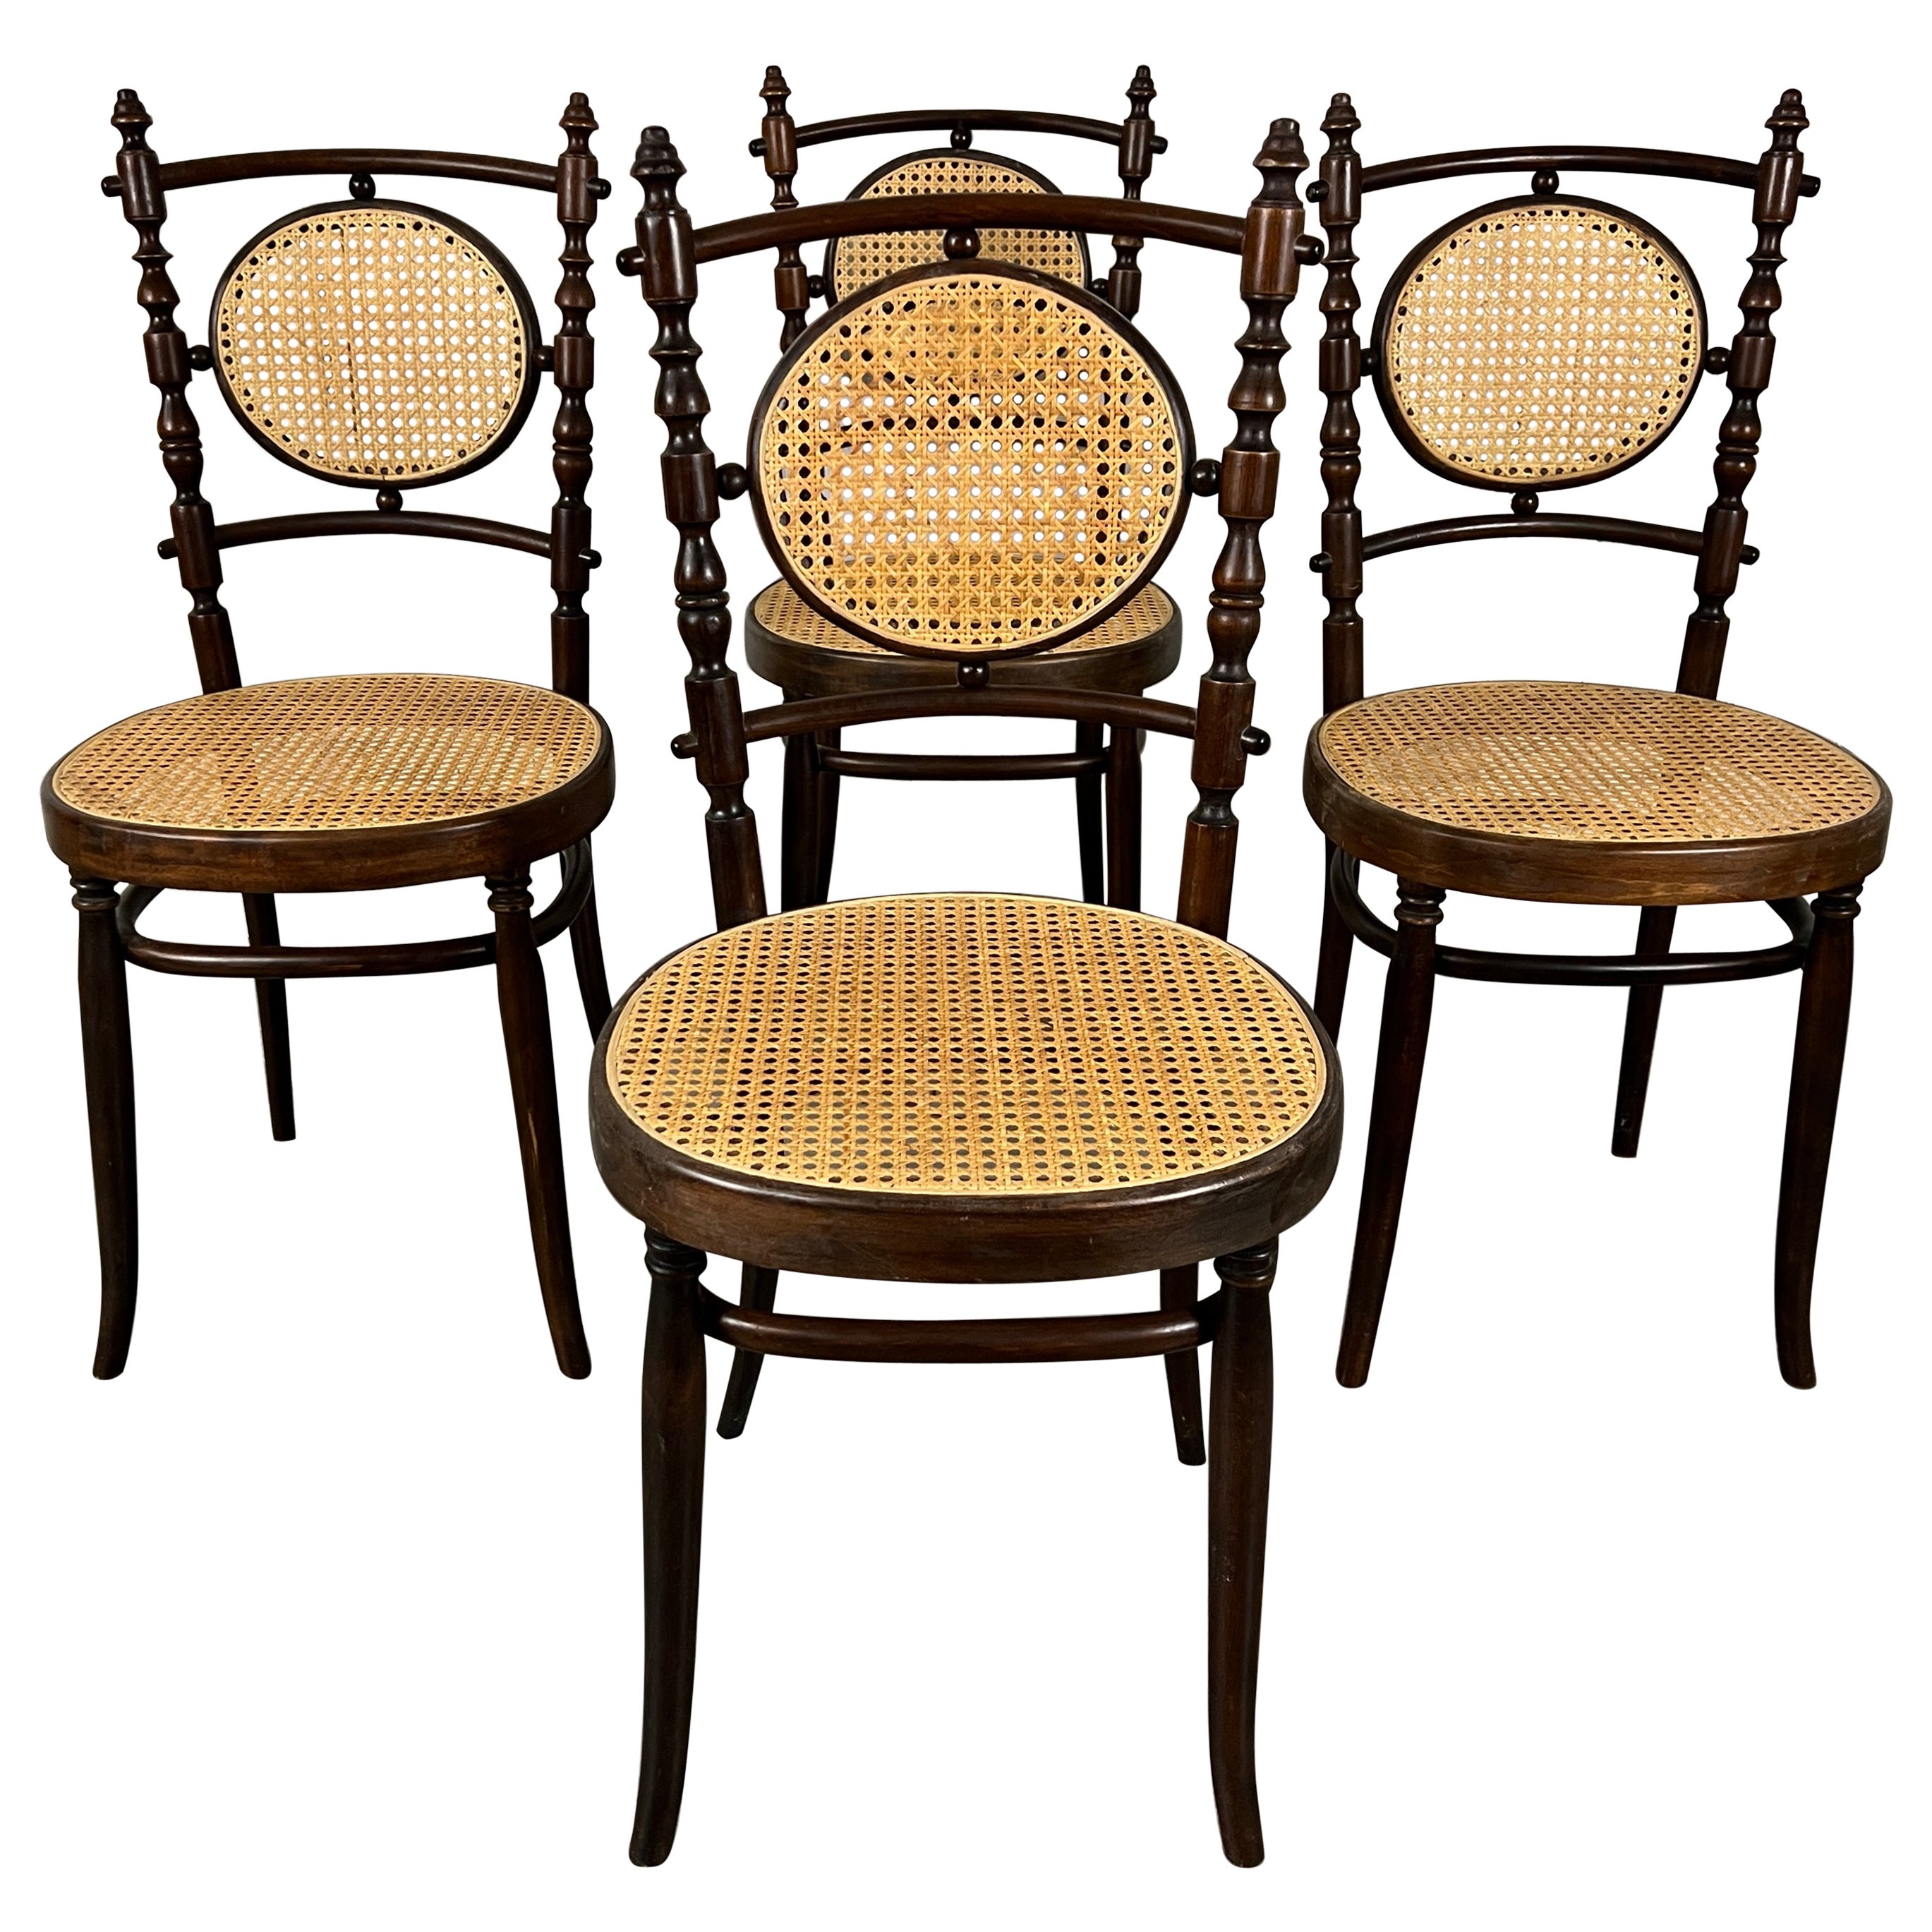 Salvatore Leone Bentwood Dining Chairs For Sale